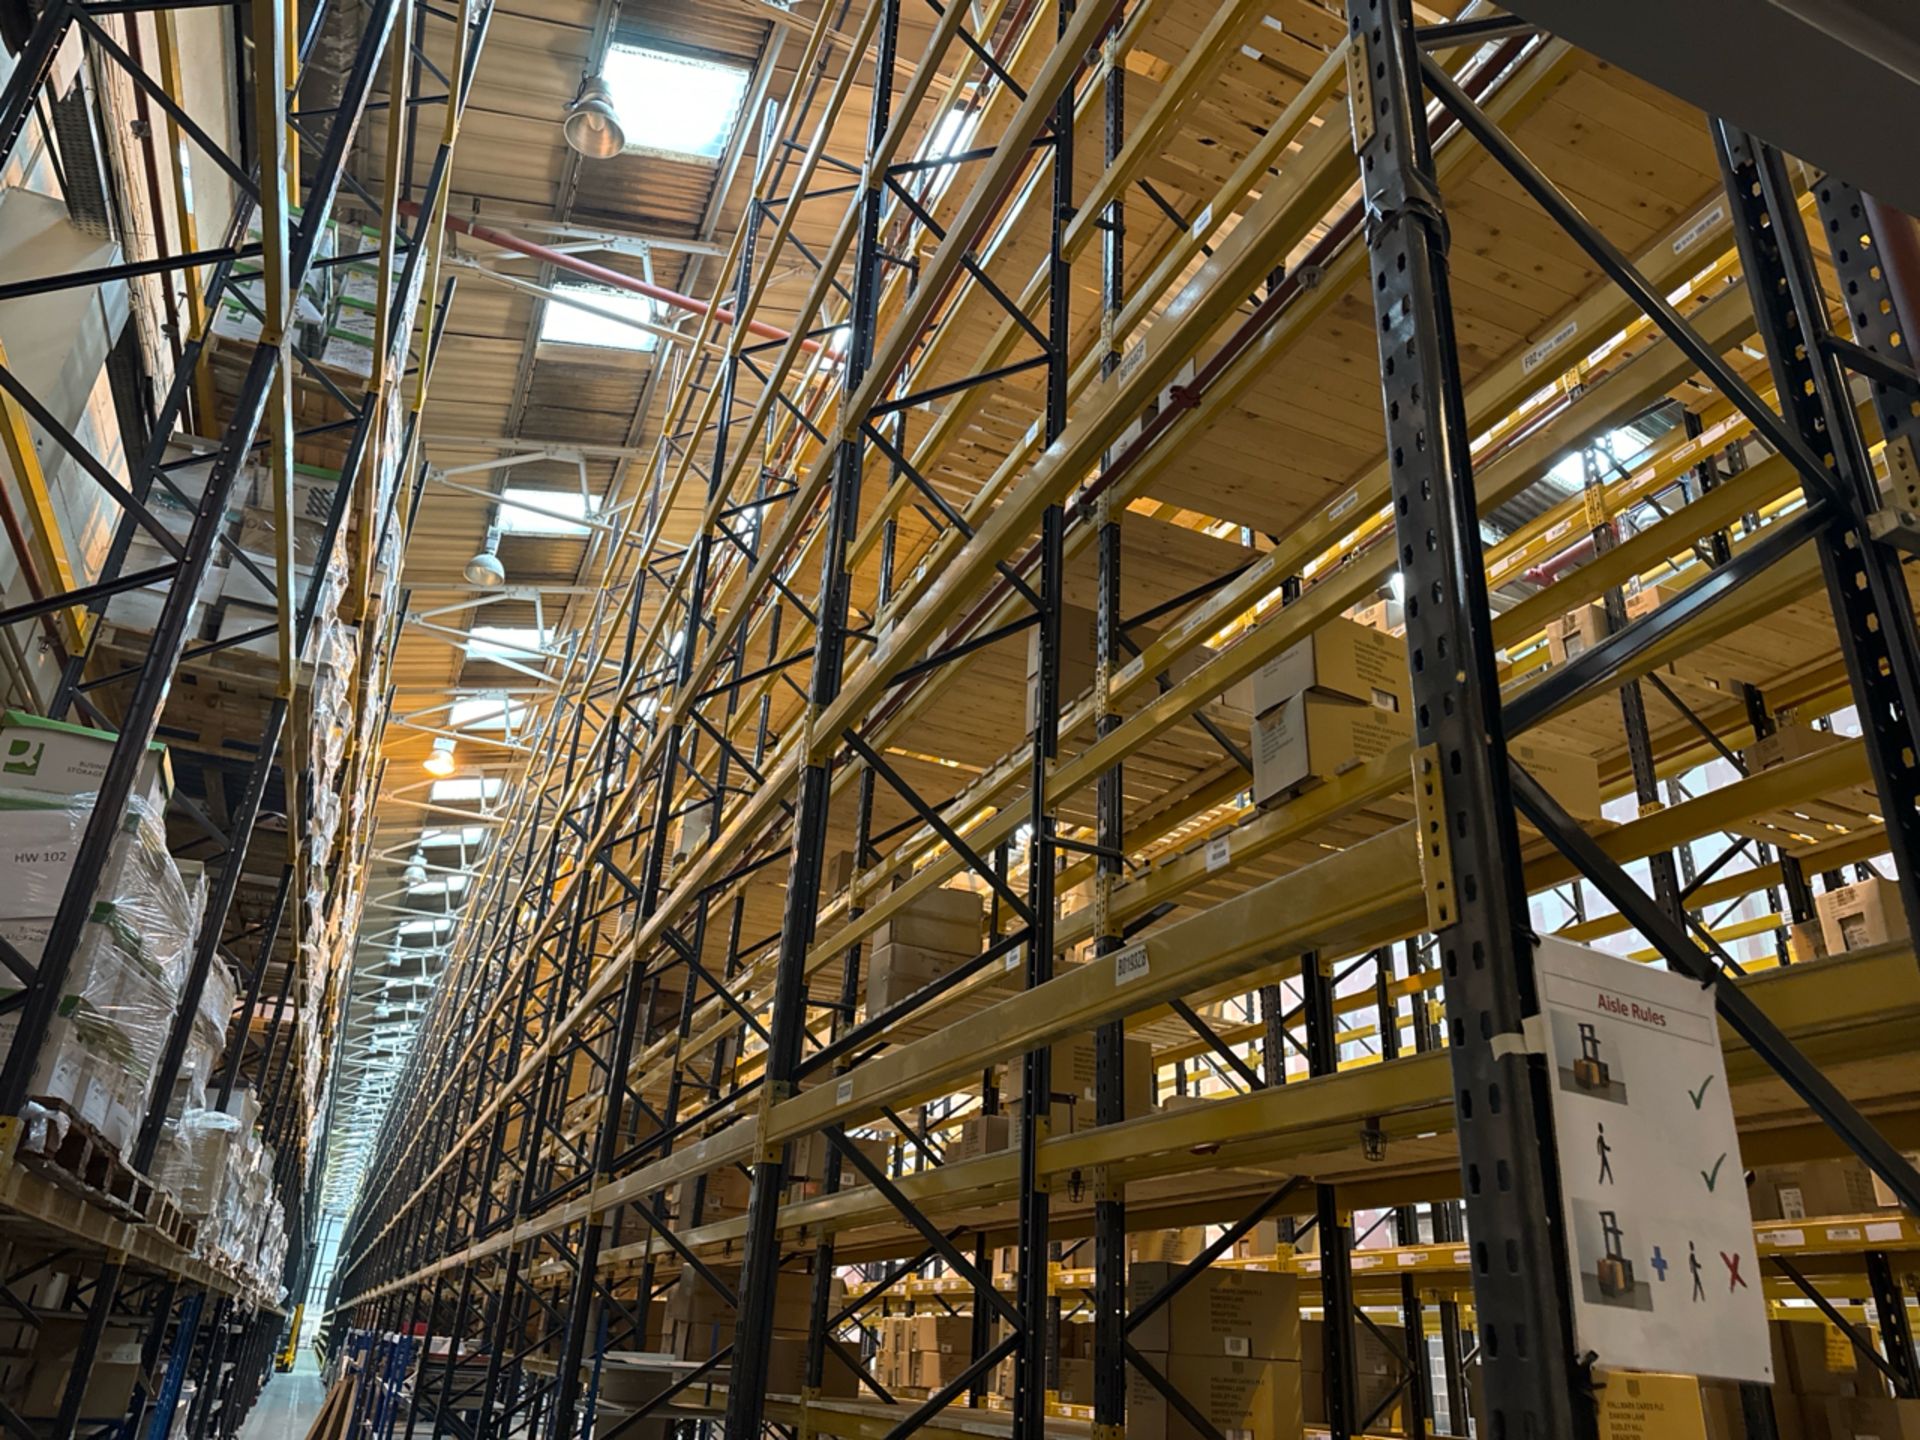 Run Of 46 Bays Of Back To Back Boltless Industrial Pallet Racking - Image 11 of 13